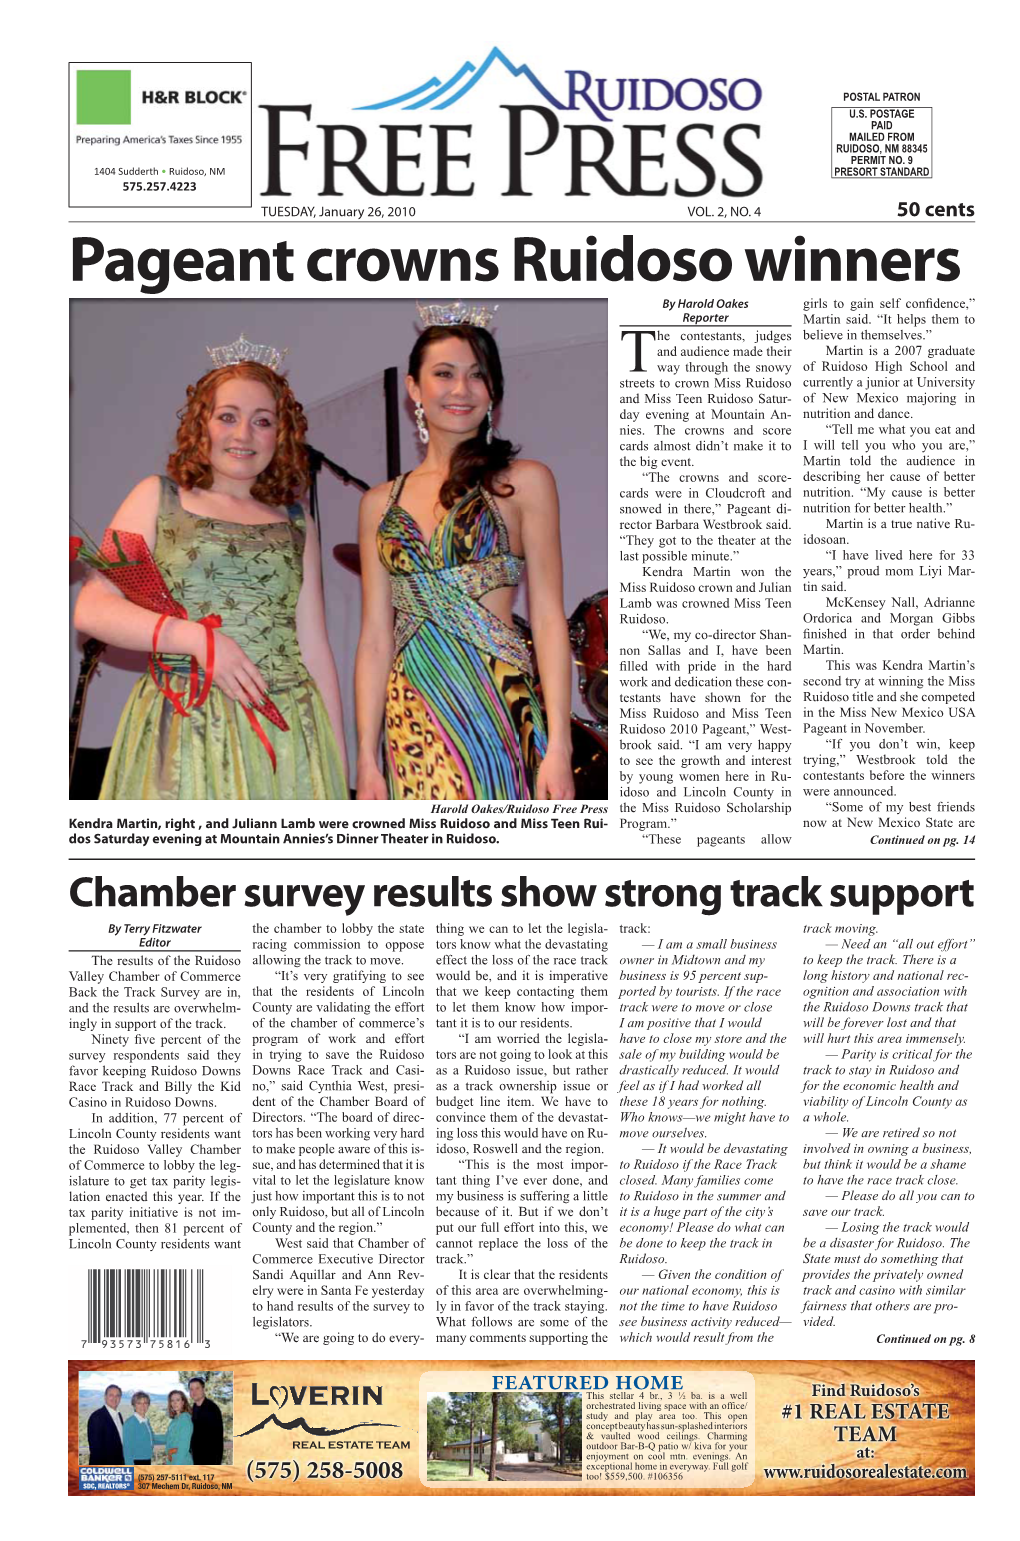 Pageant Crowns Ruidoso Winners by Harold Oakes Girls to Gain Self Confi Dence,” Reporter Martin Said